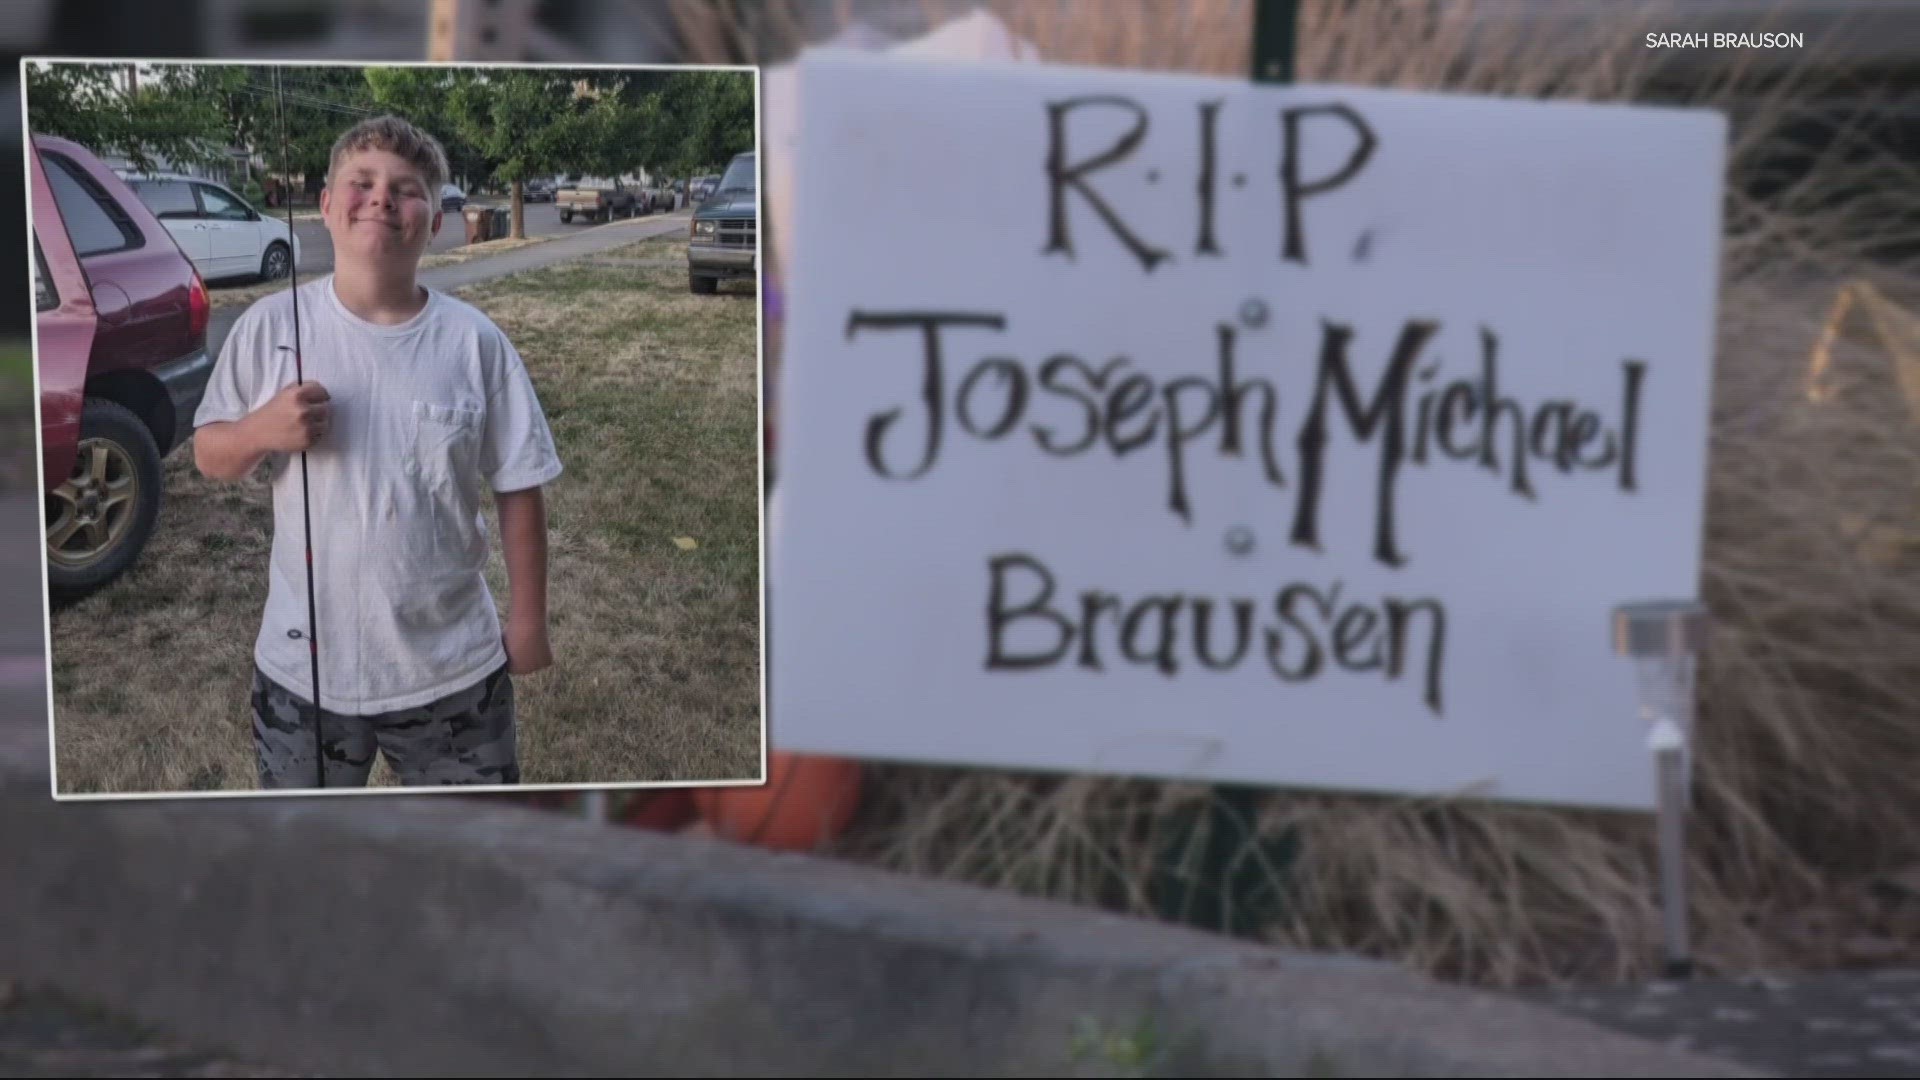 On Saturday afternoon, family members tell KGW Joseph Brausen was hit by a car on Southeast 10th Avenue.